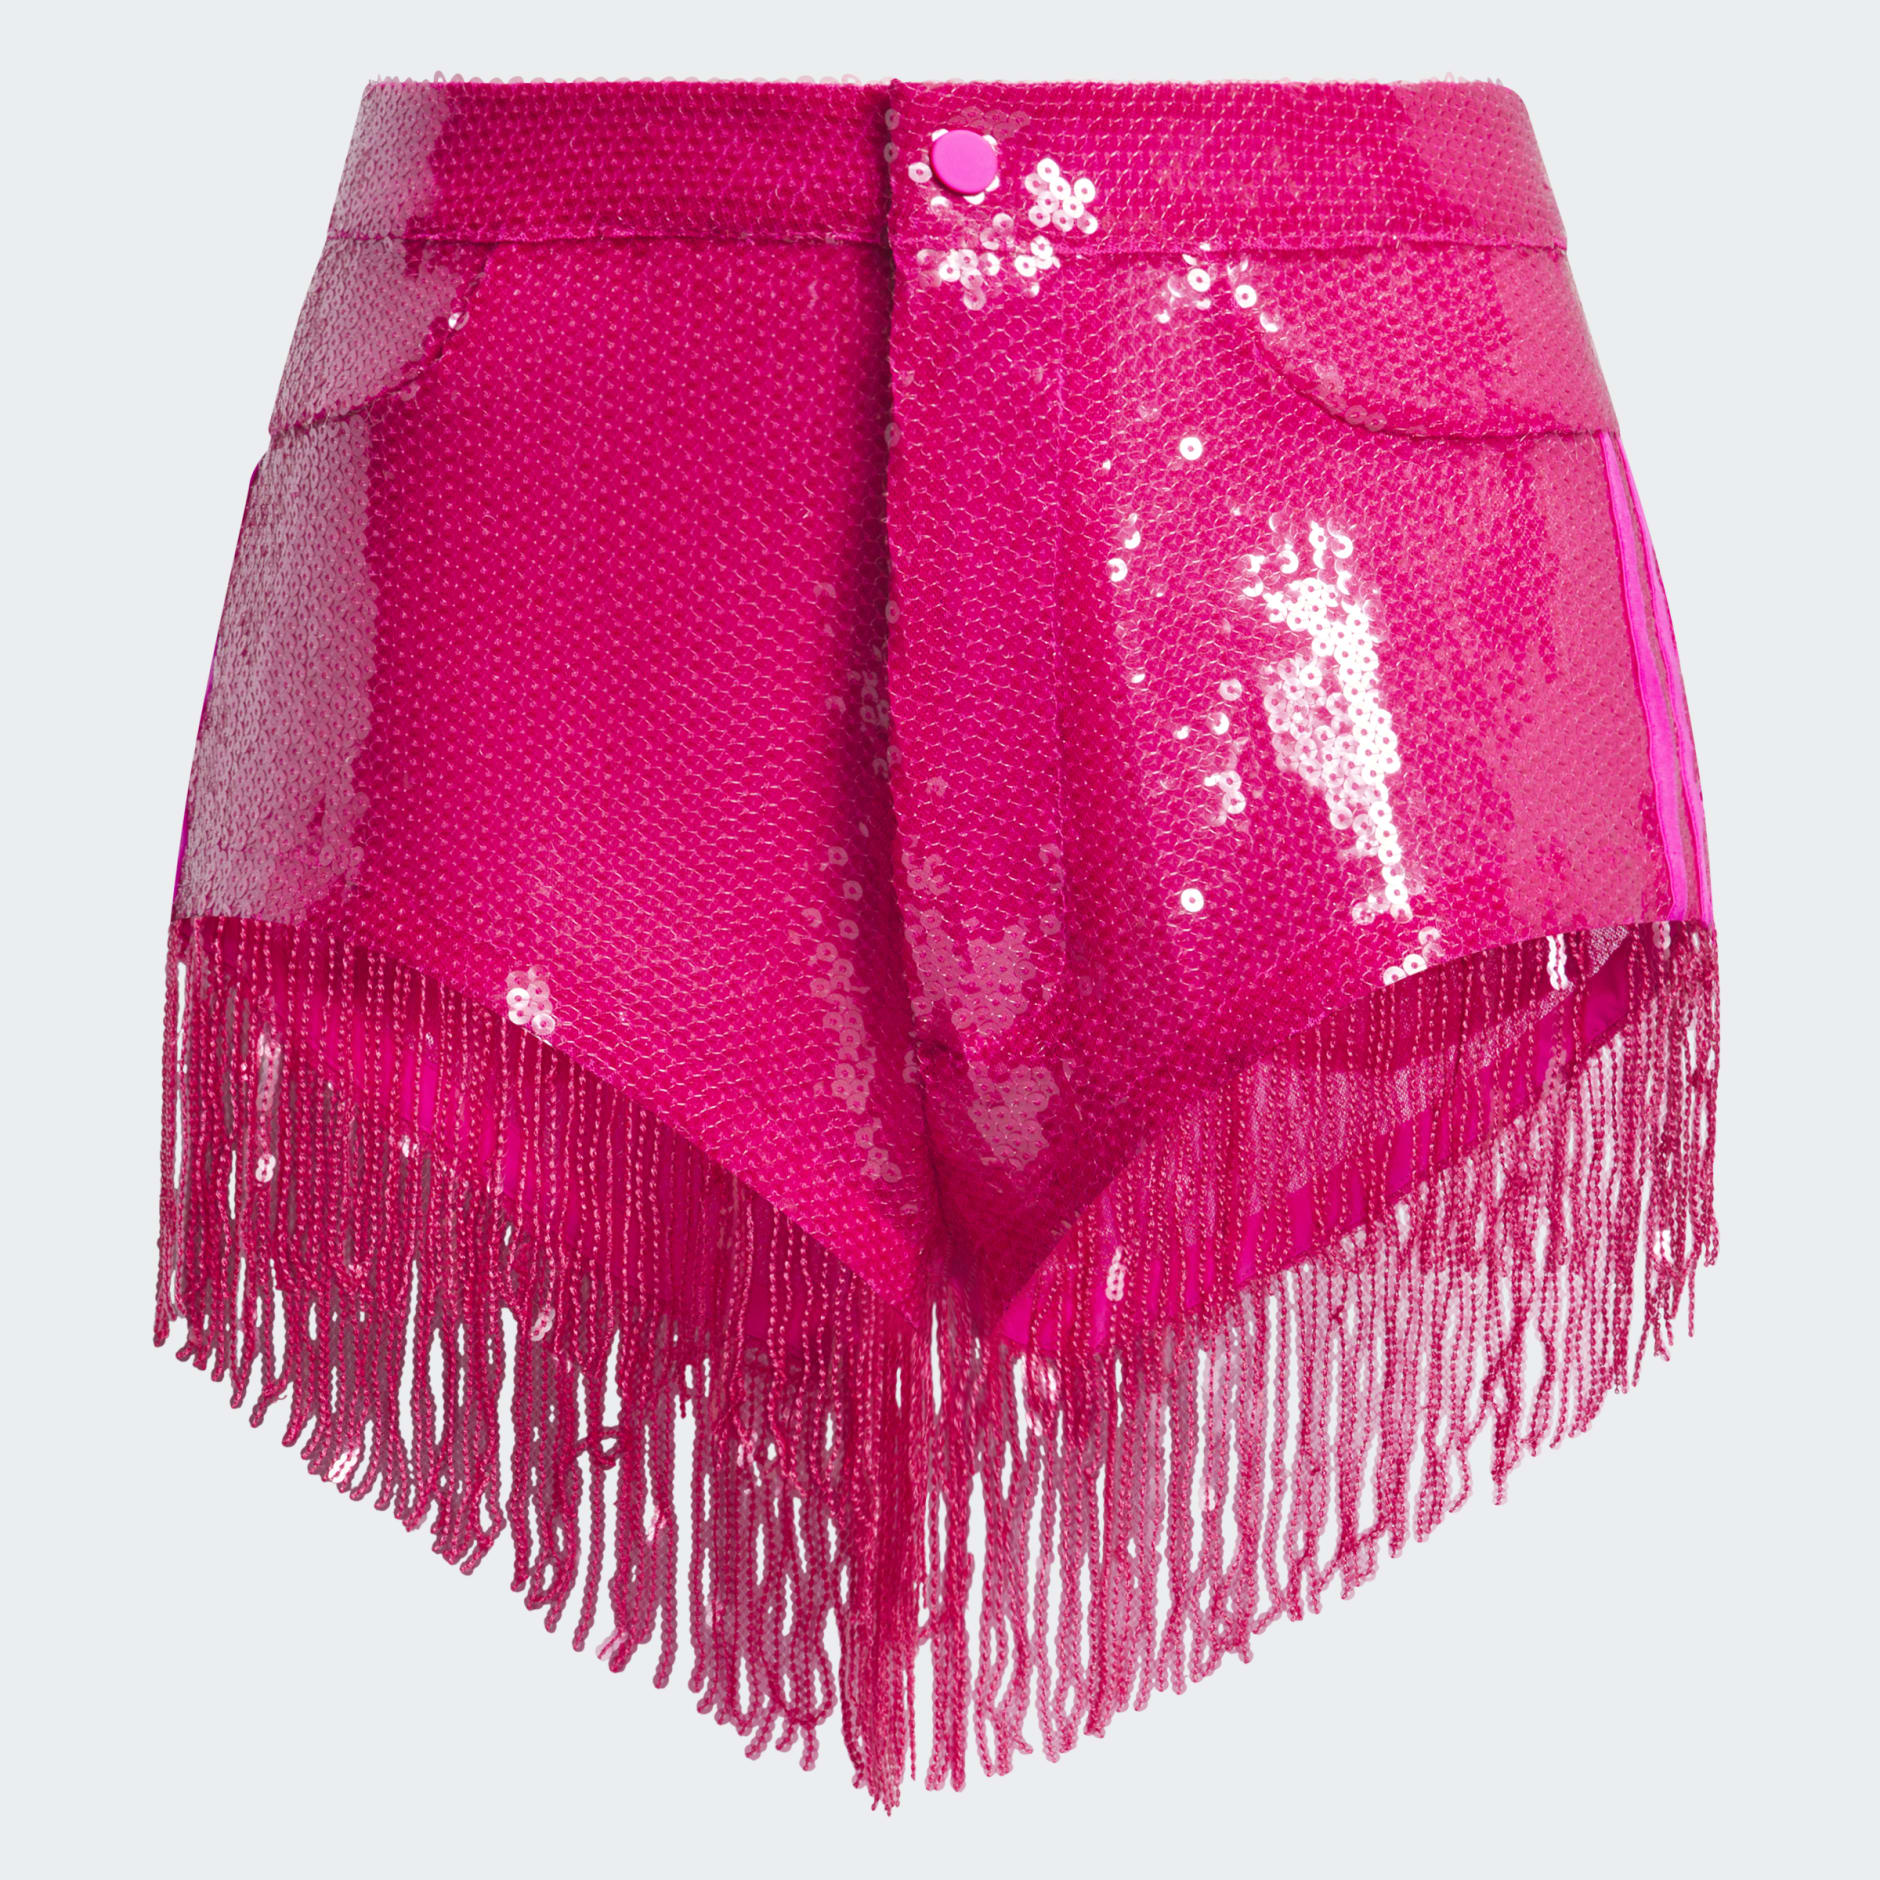 Women's Clothing - IVY PARK Sequin Shorts with Fringe - Pink